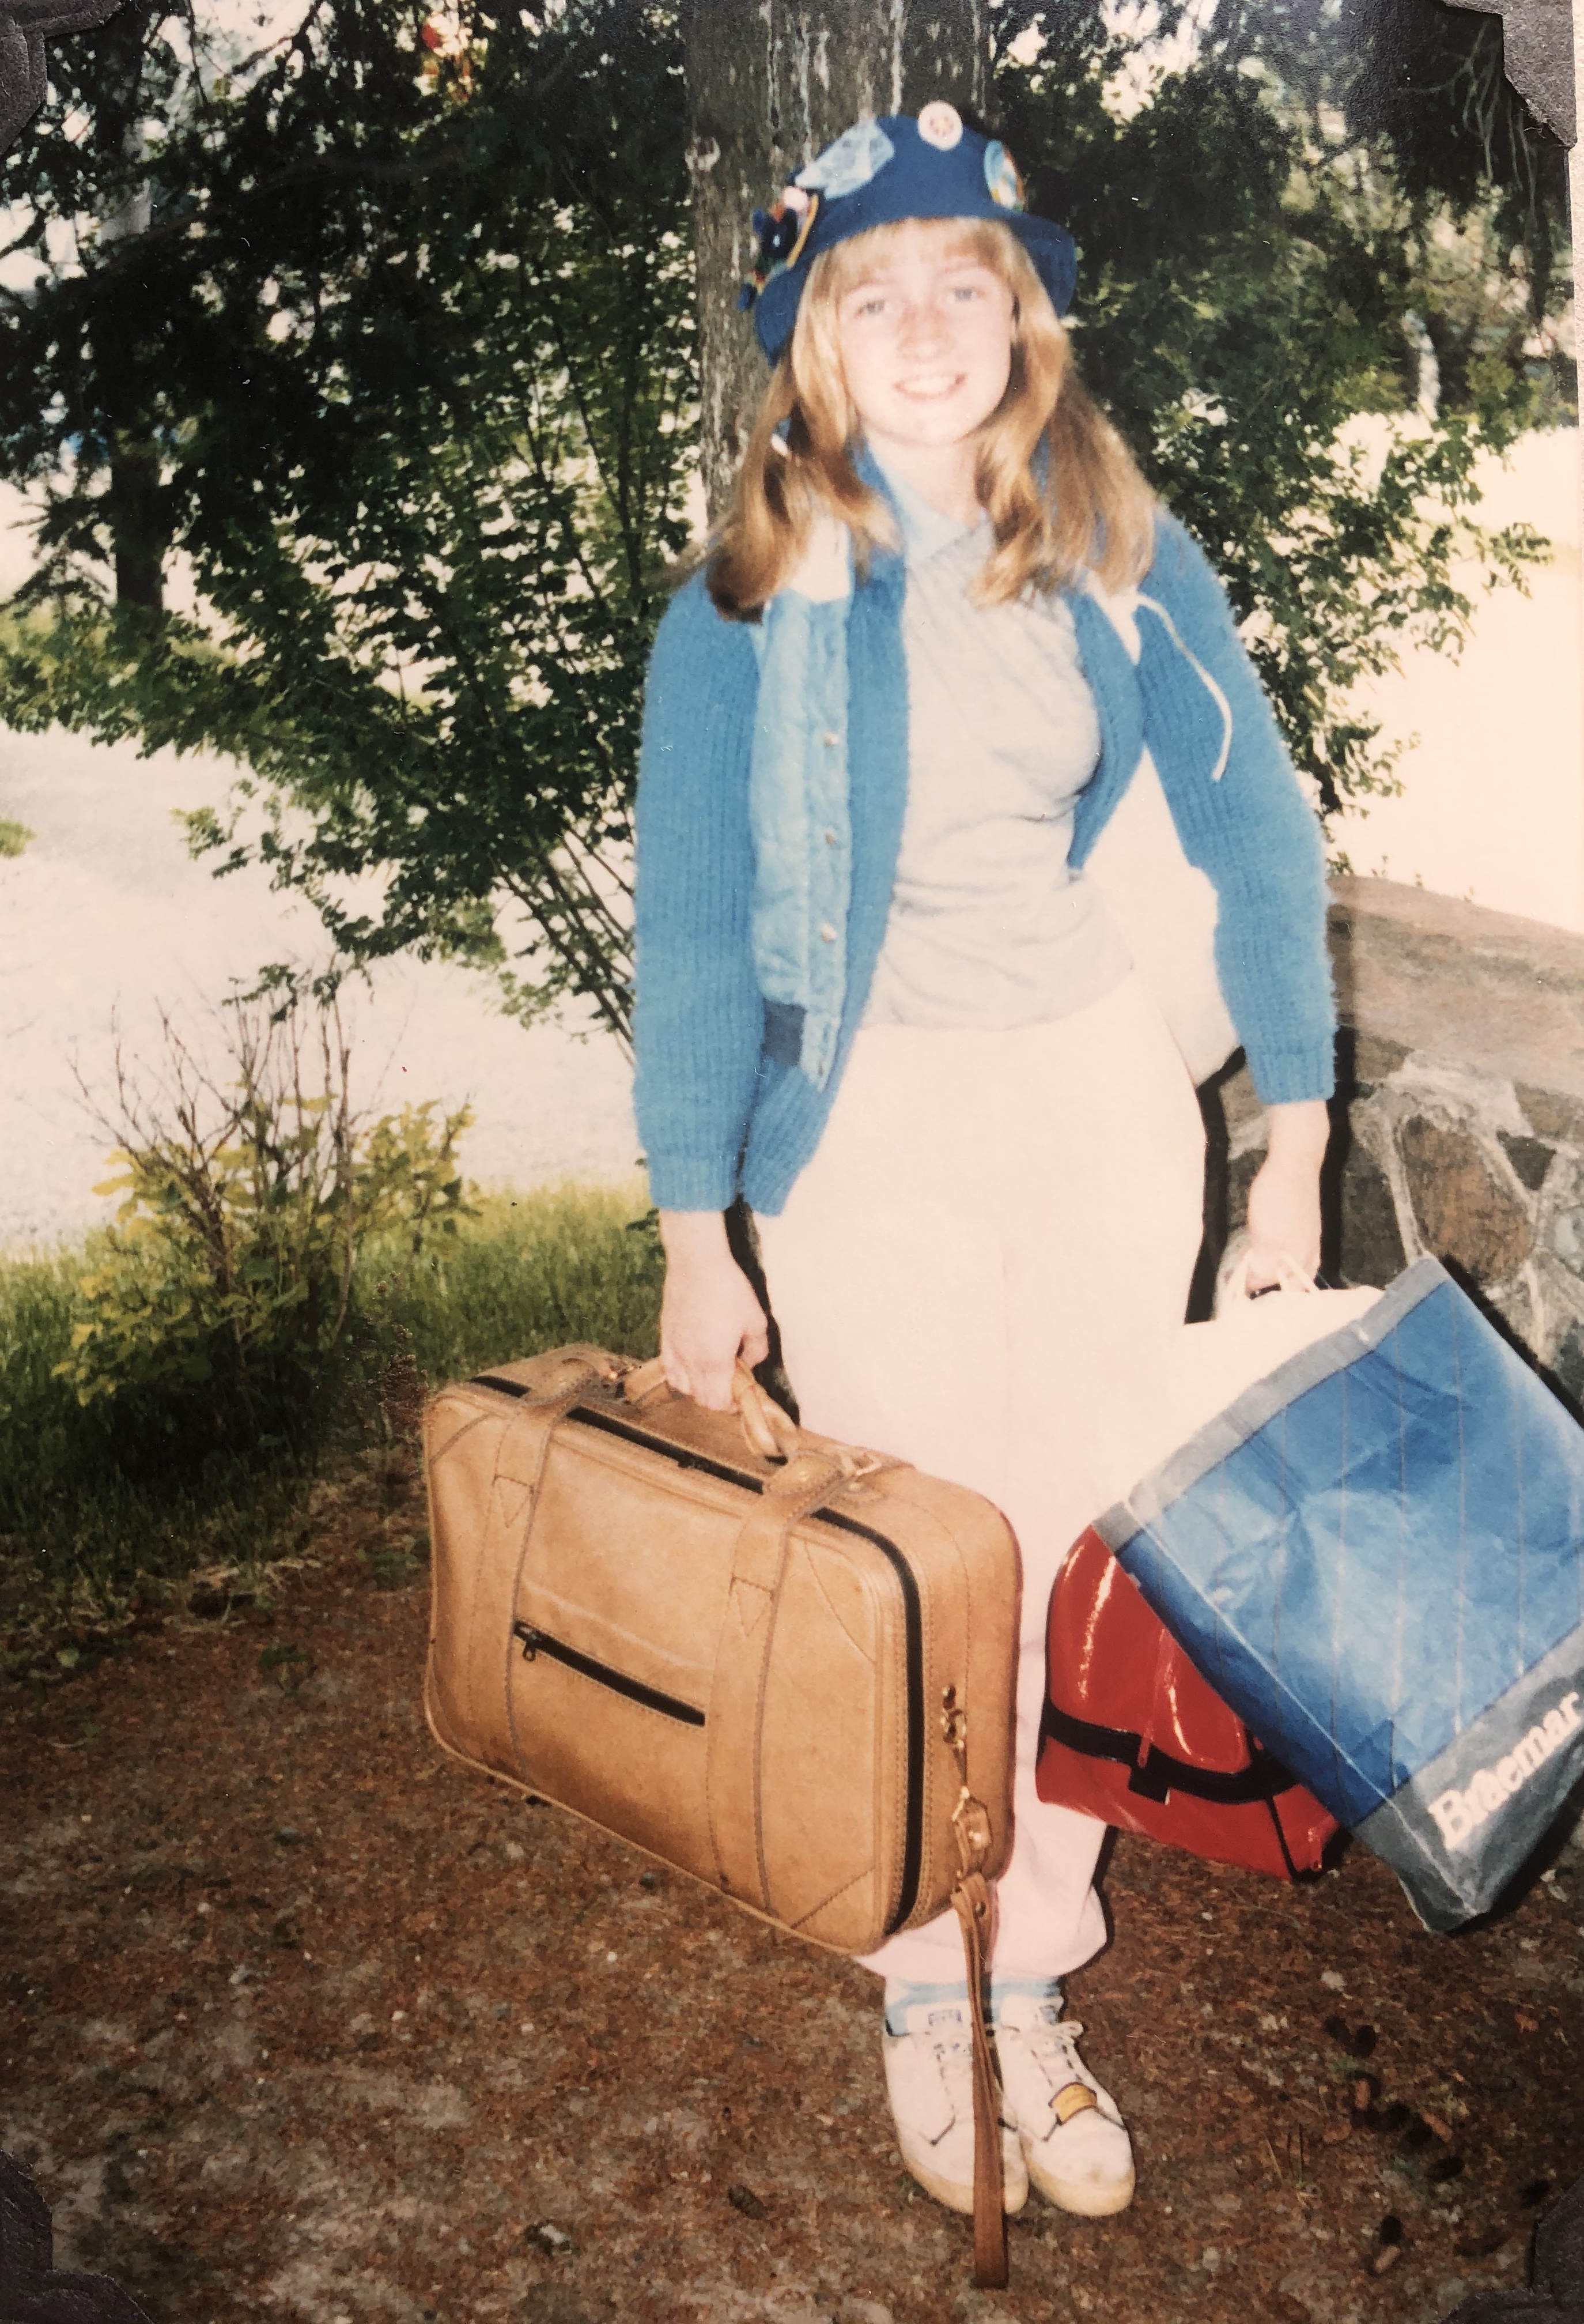 Young teenager dressed for camping, standing outdoors, smiling and holding luggage